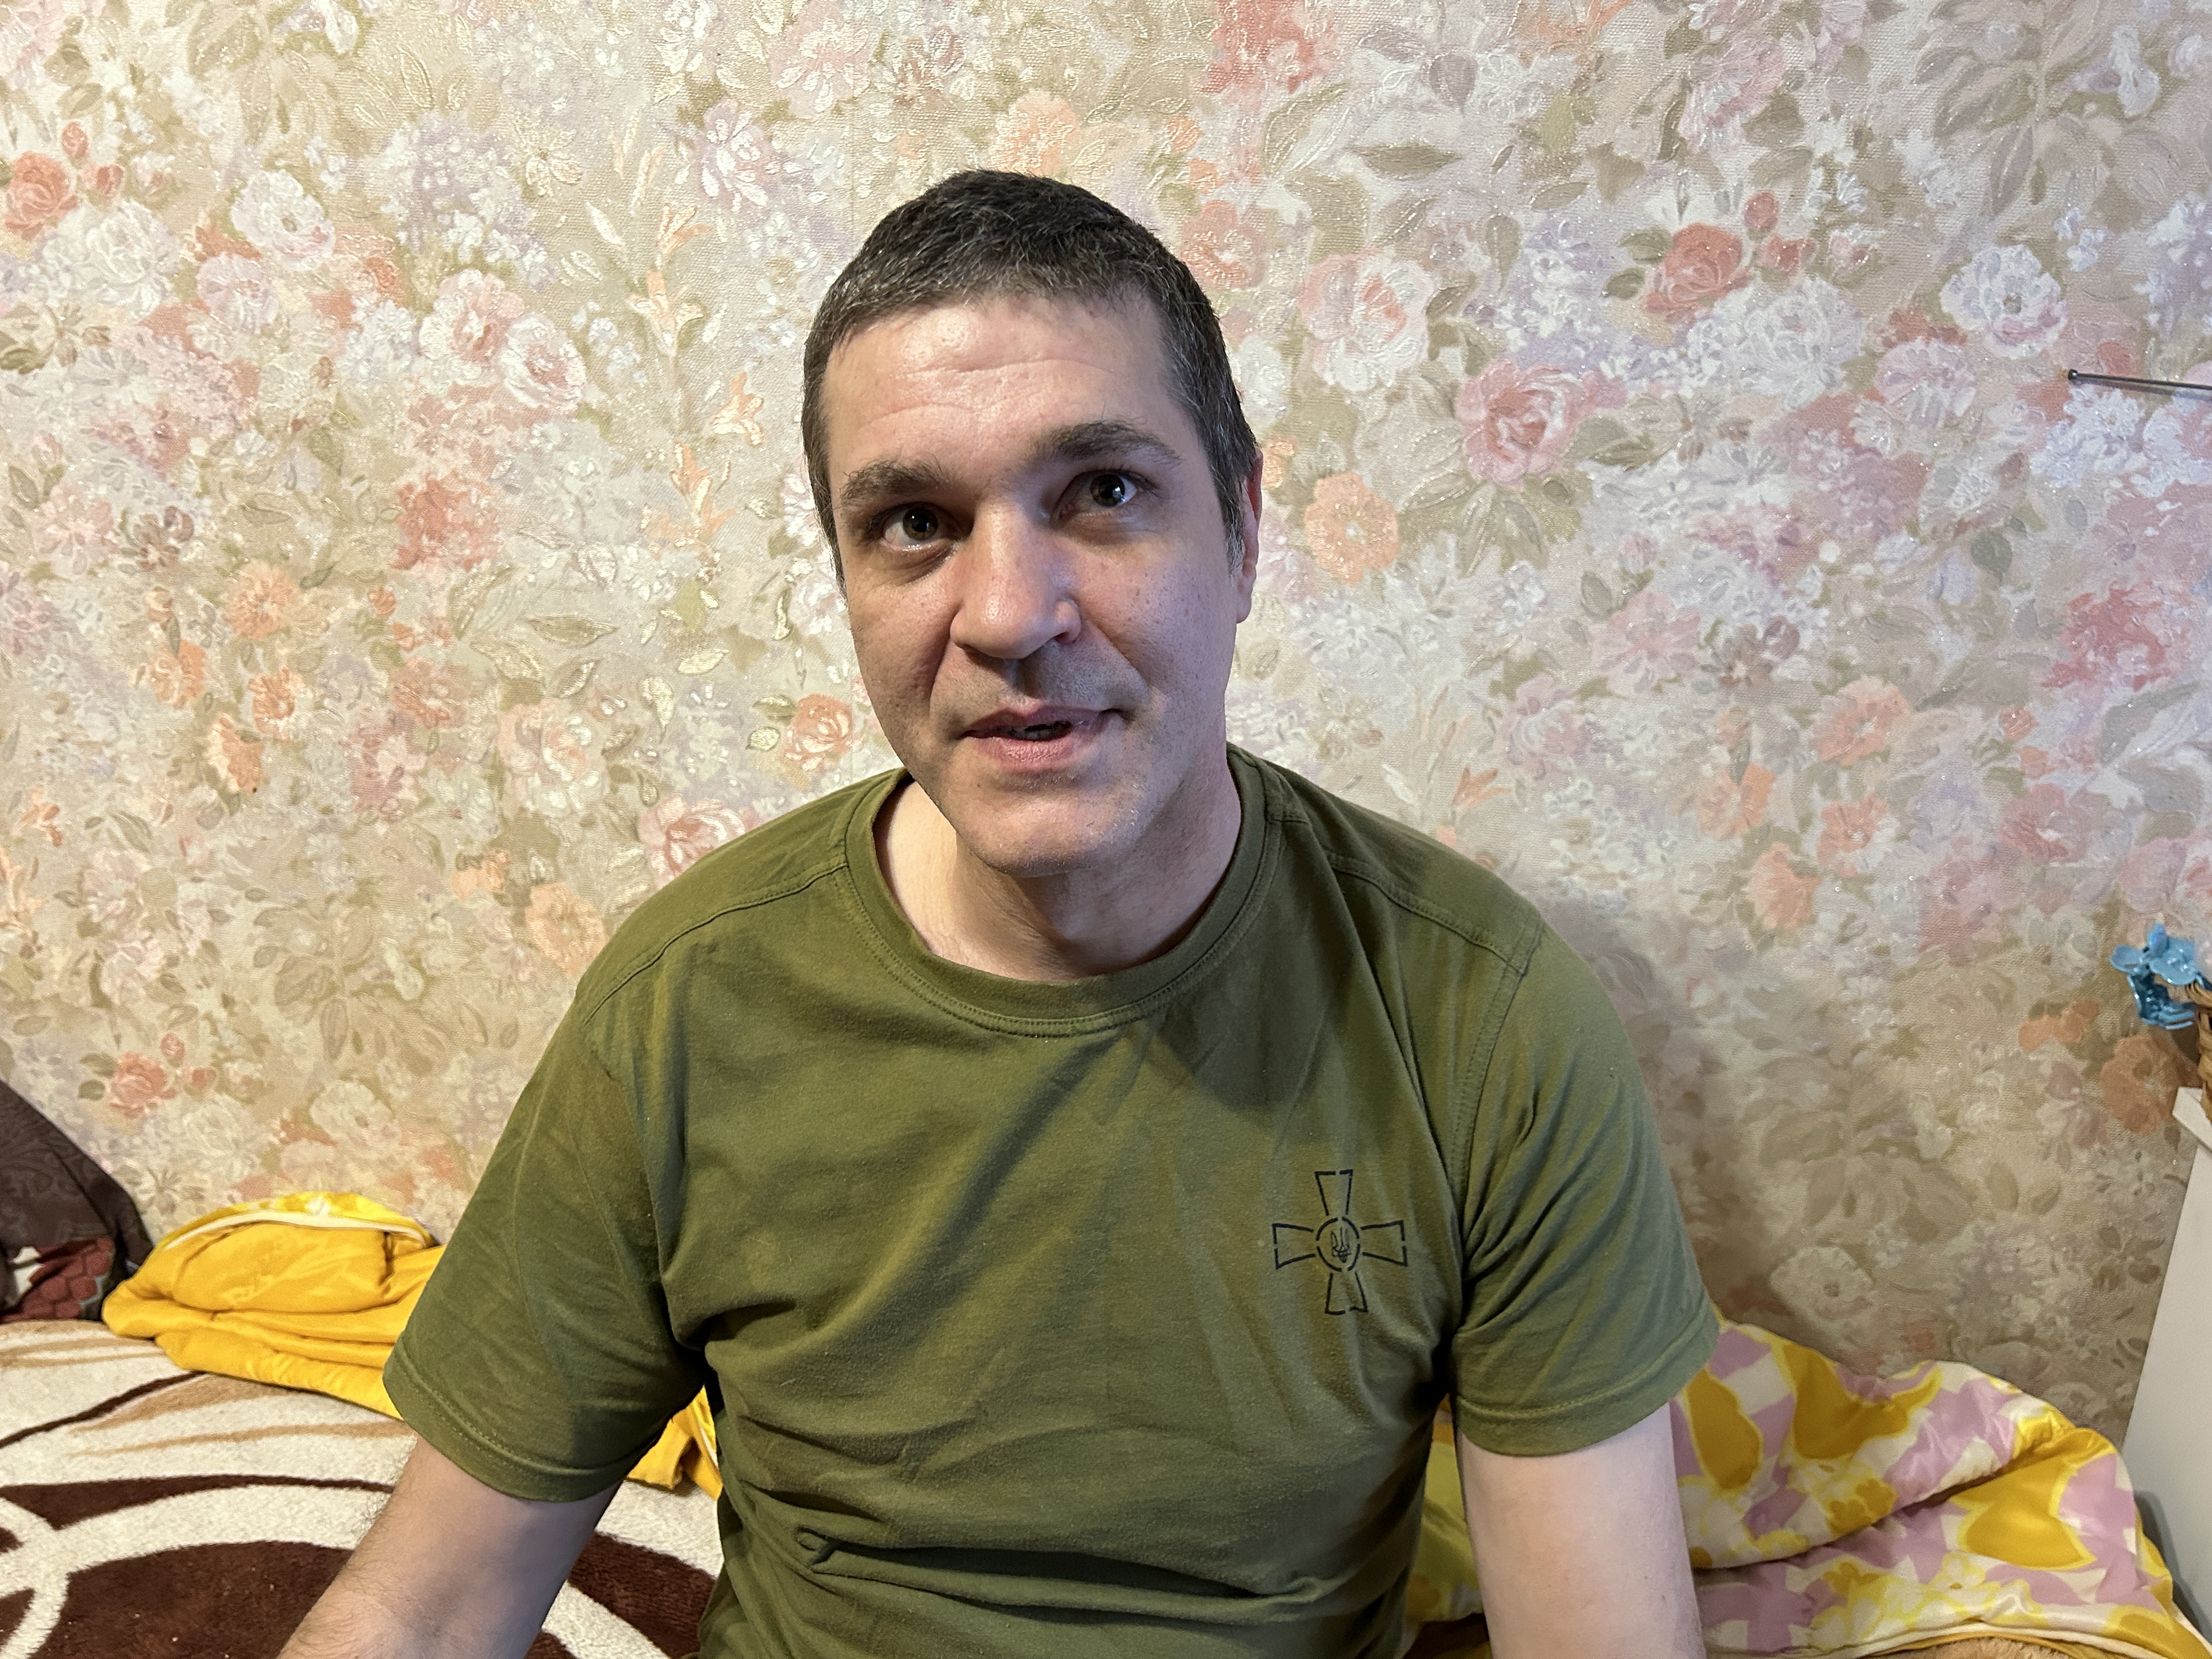 A wounded Ukrainian soldier